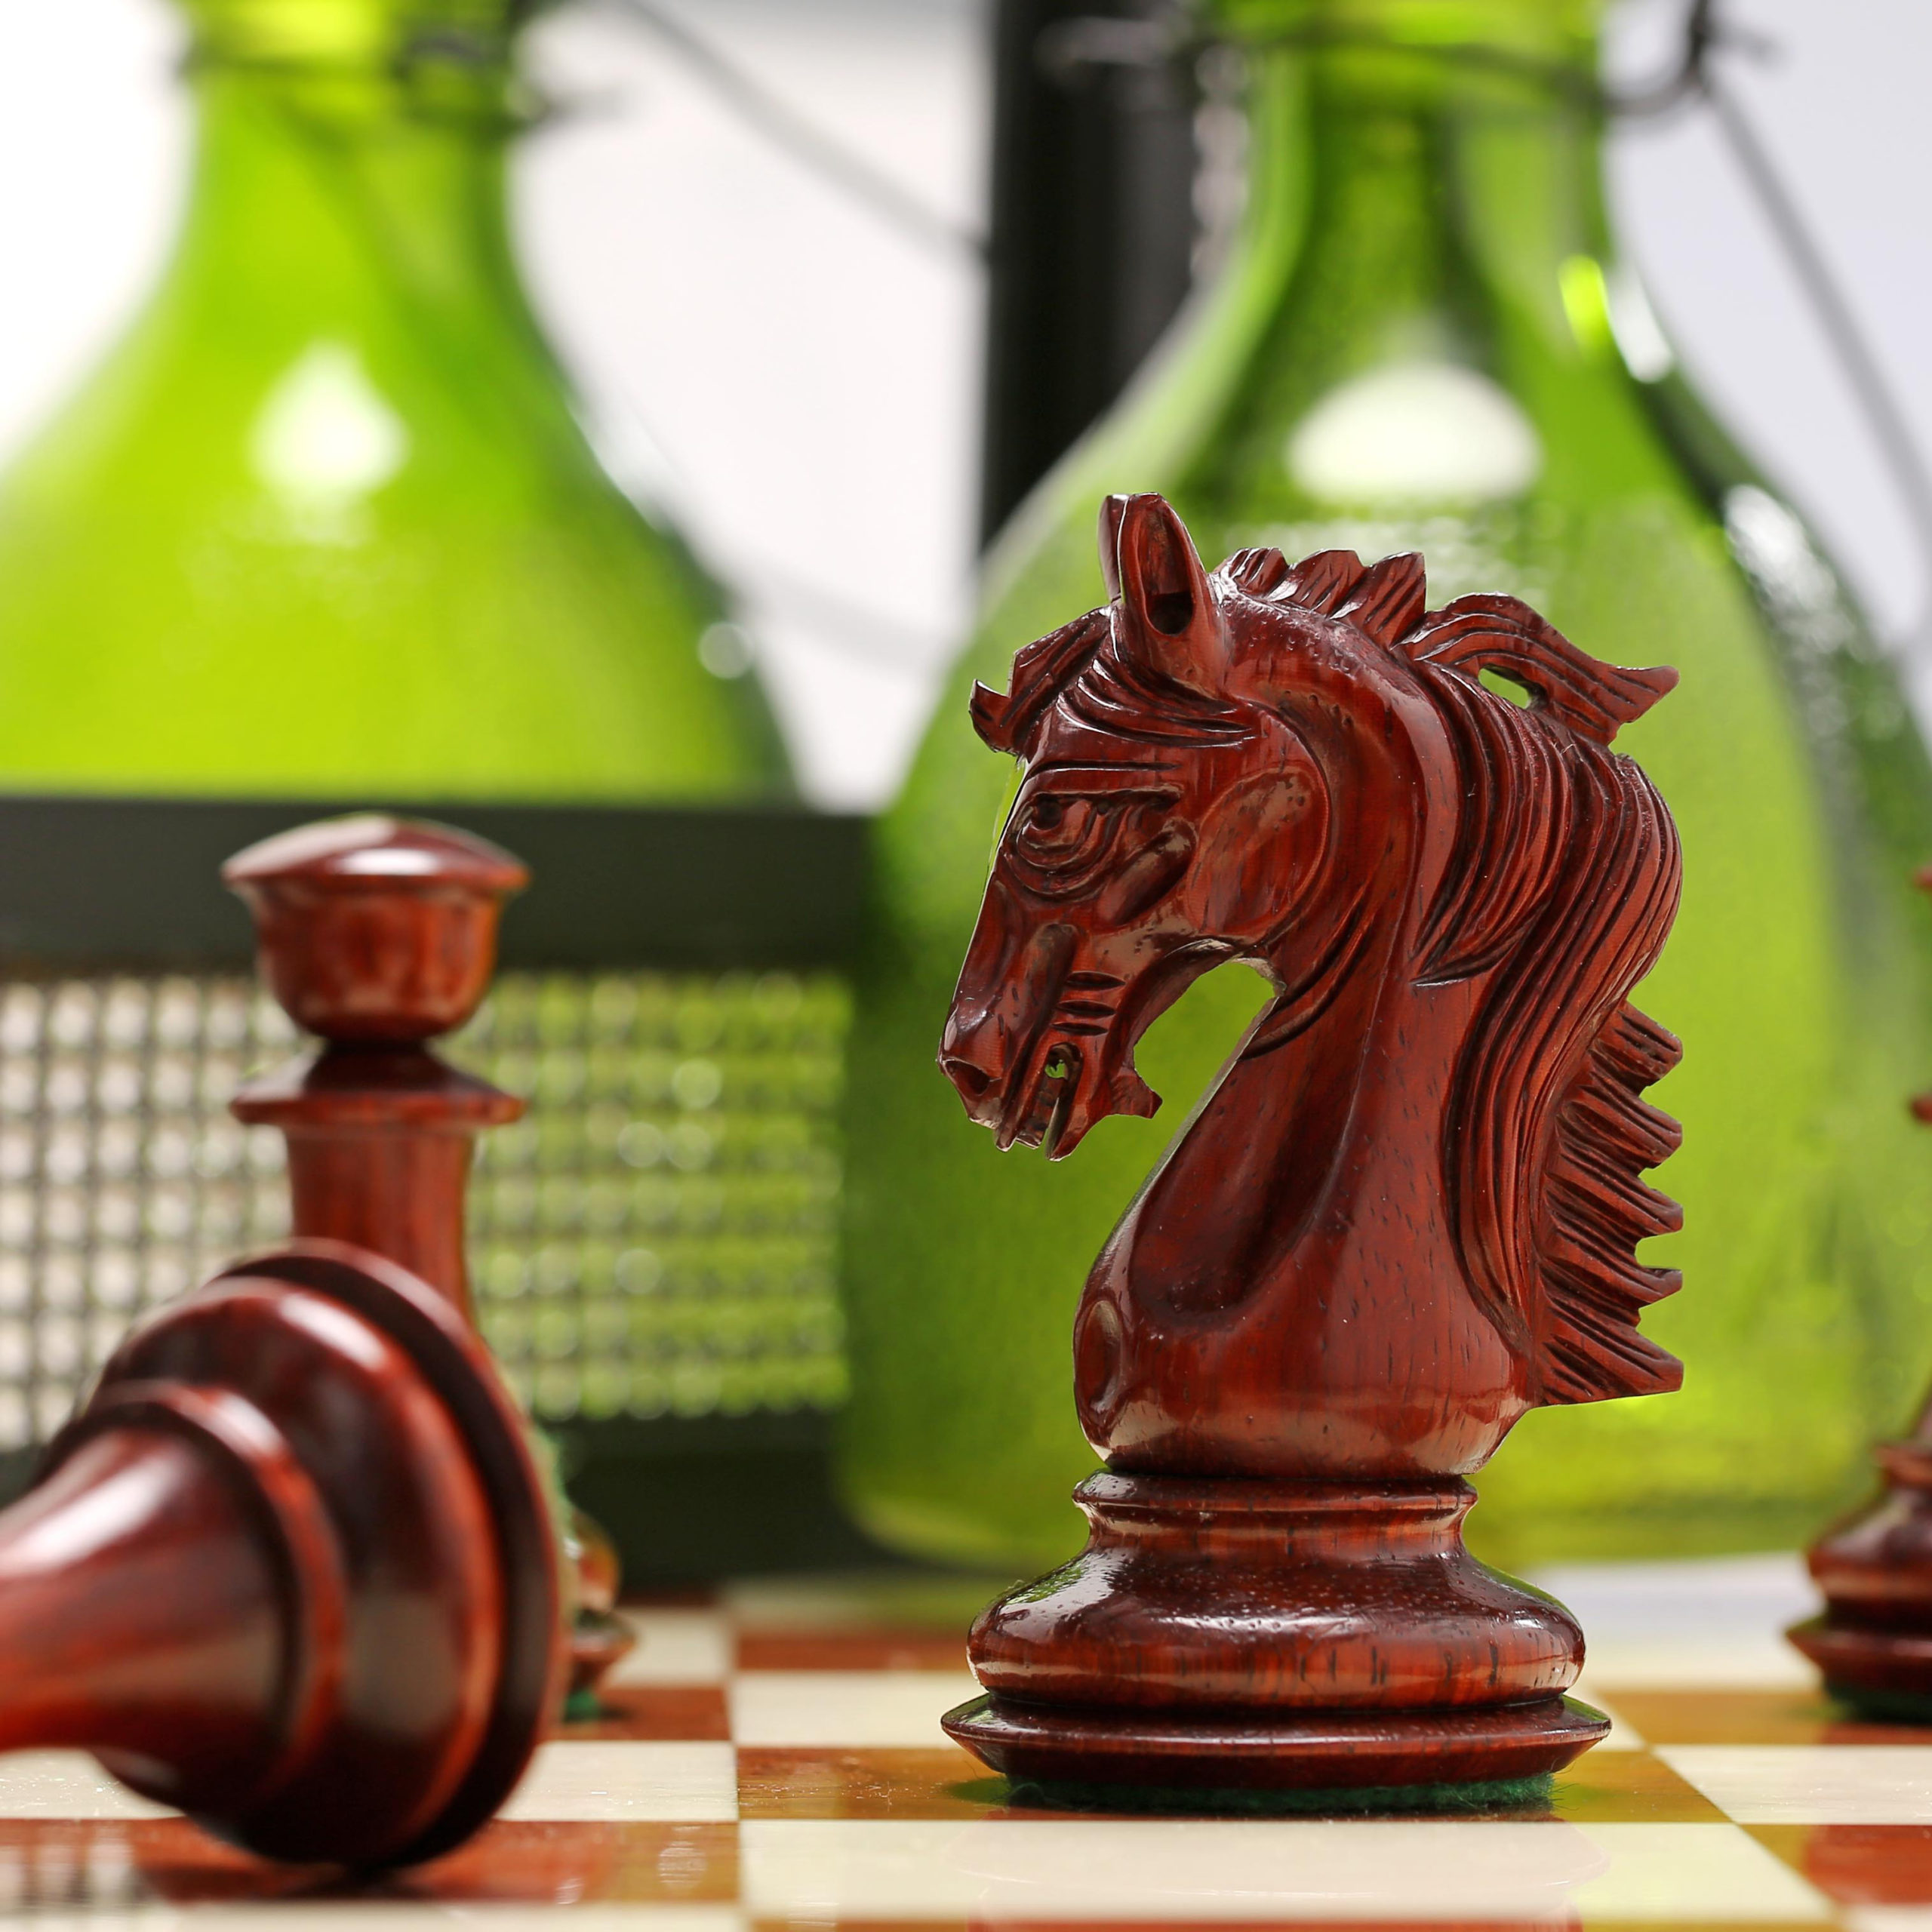 The Exquisite Carved Brass Chess Set